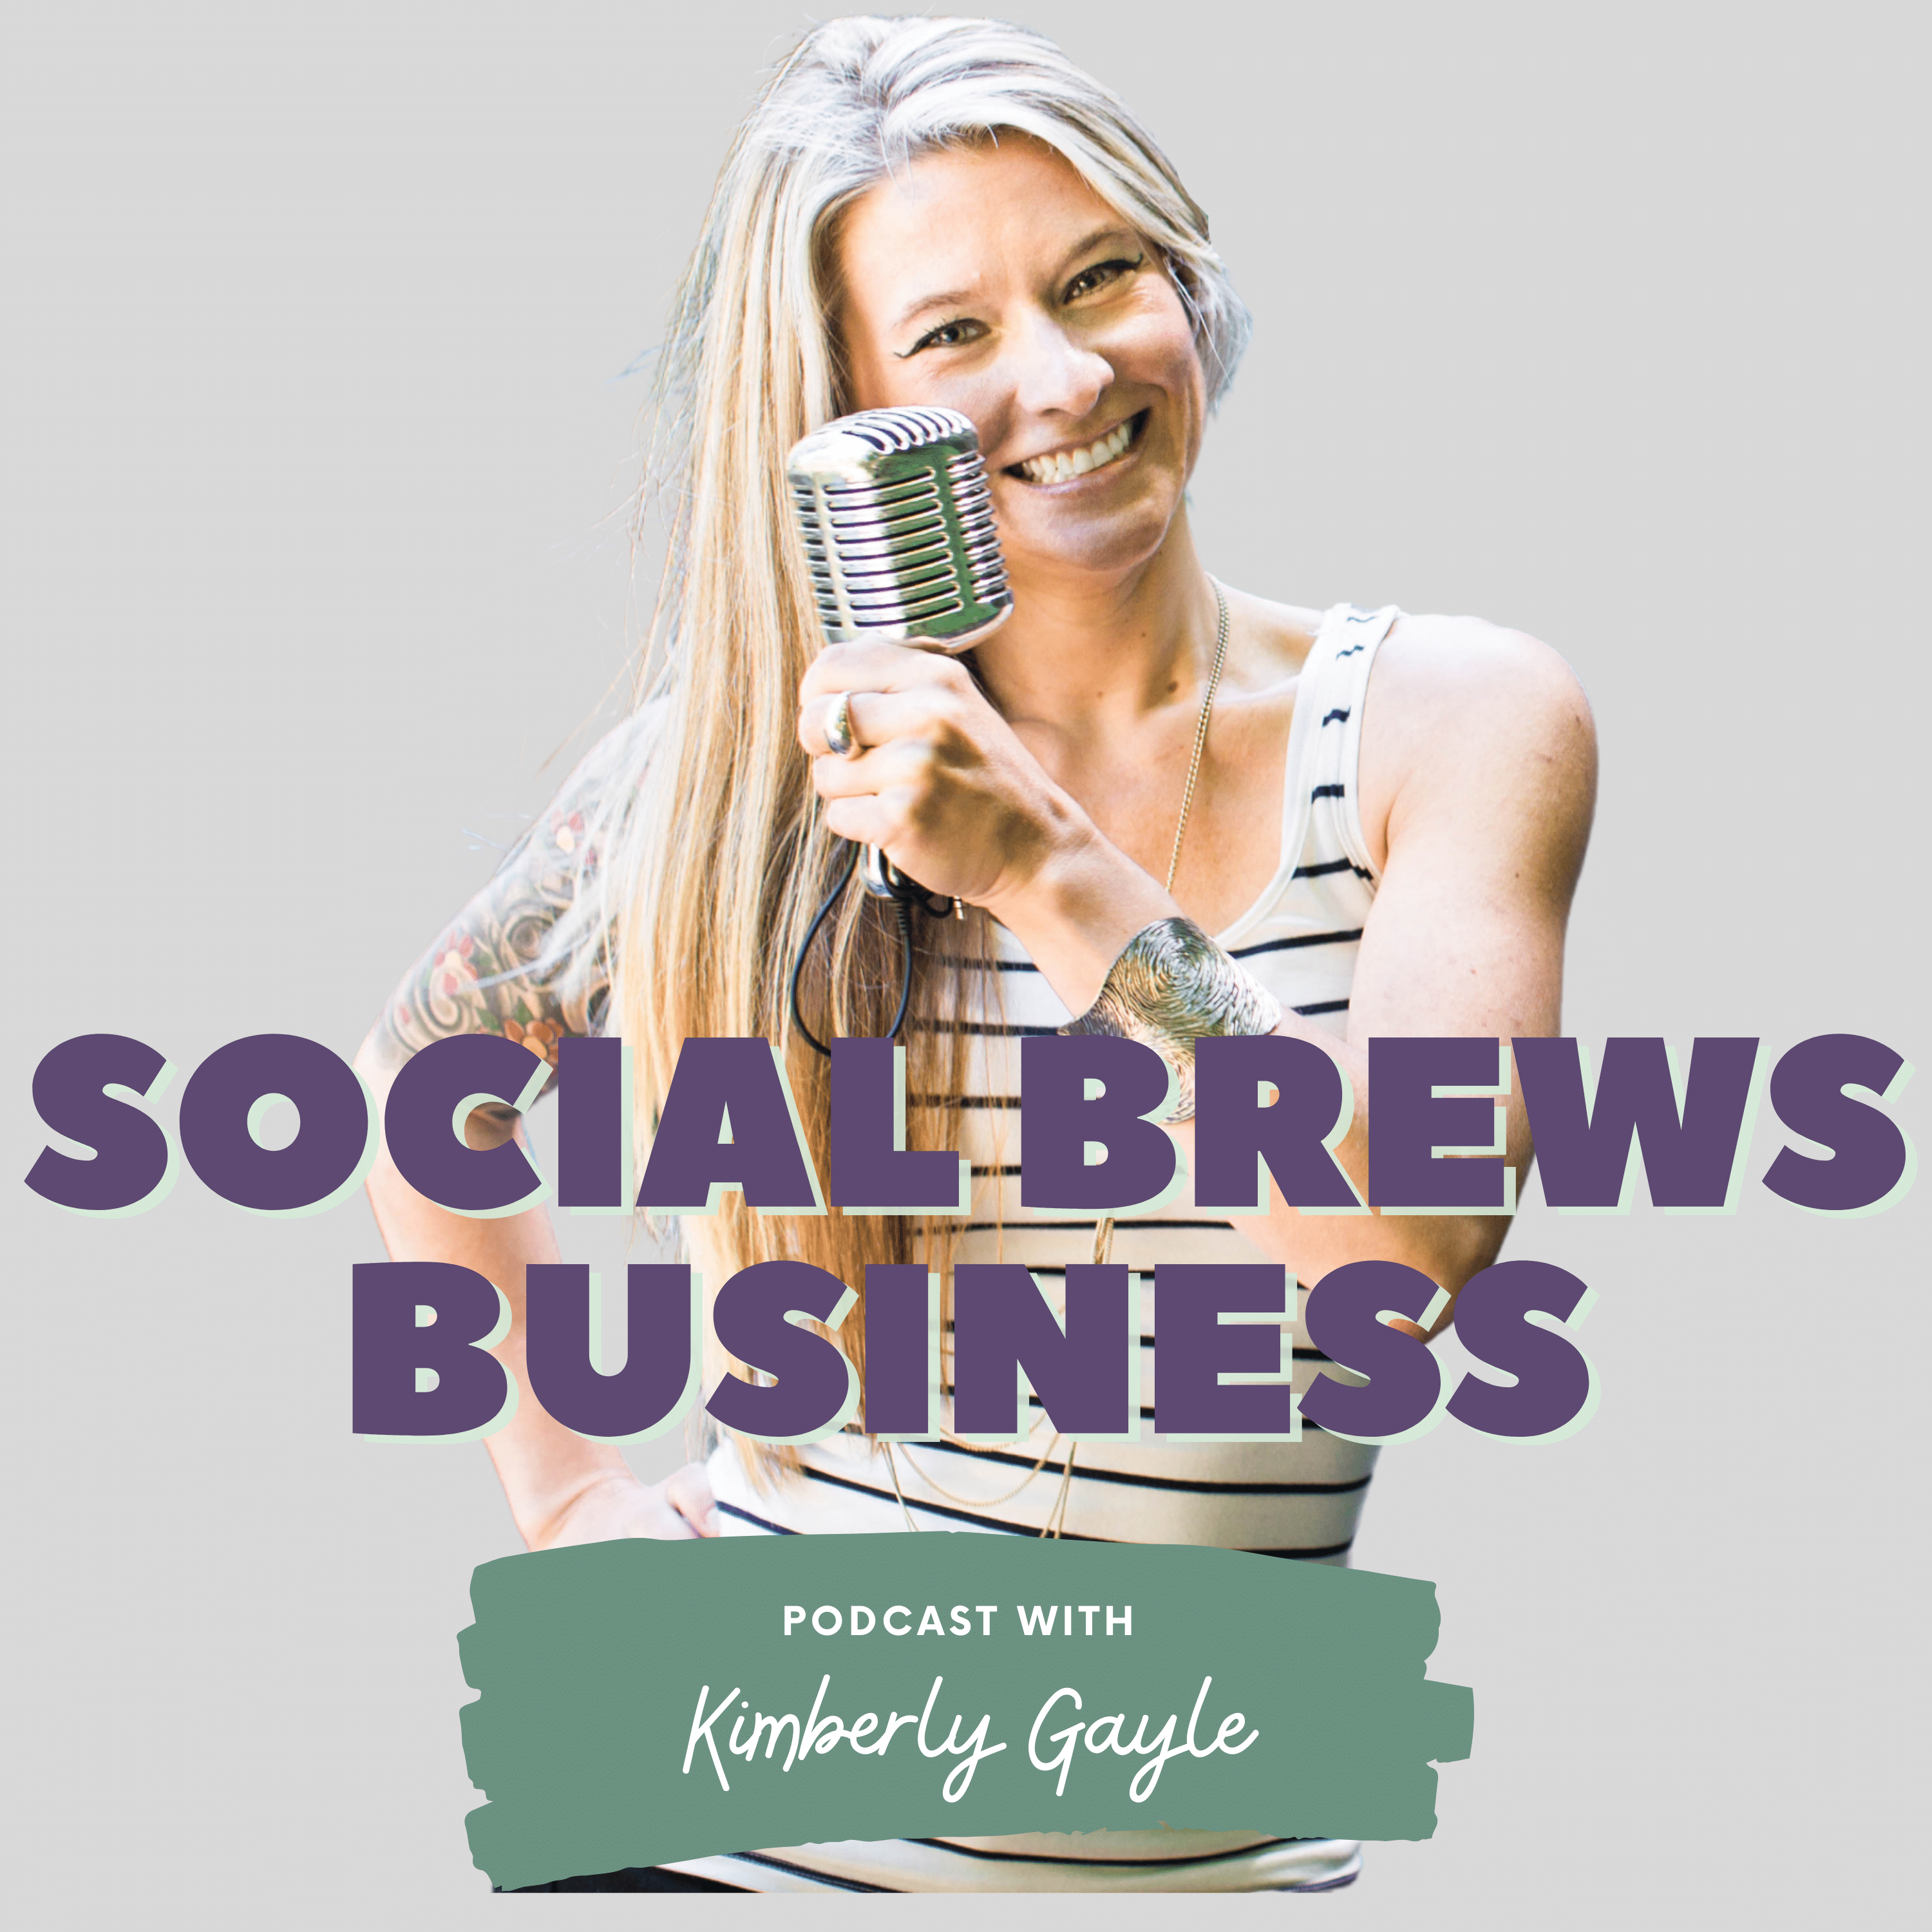 Introduction to the Social Brews Business Podcast